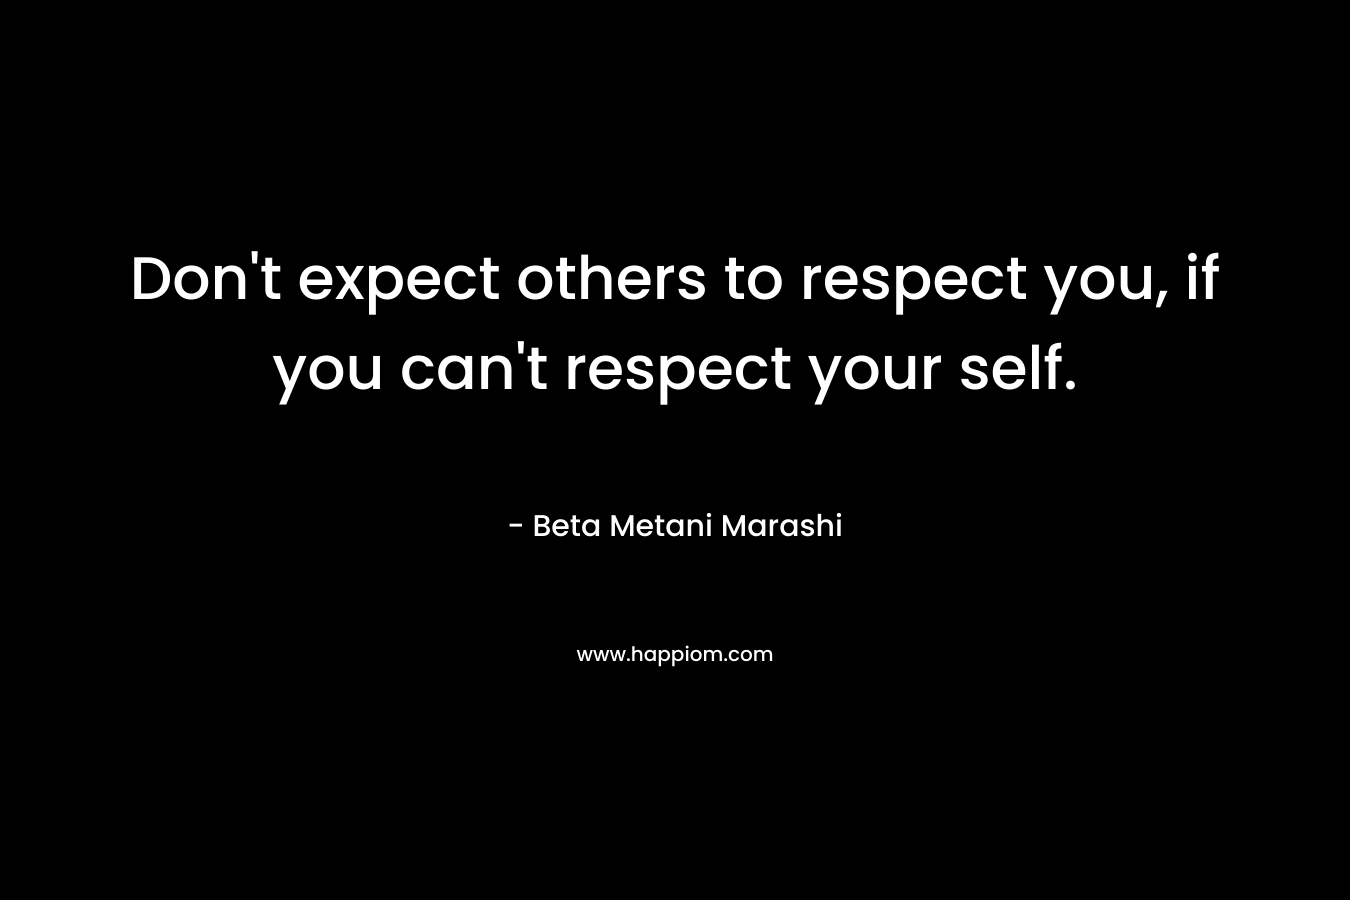 Don't expect others to respect you, if you can't respect your self.